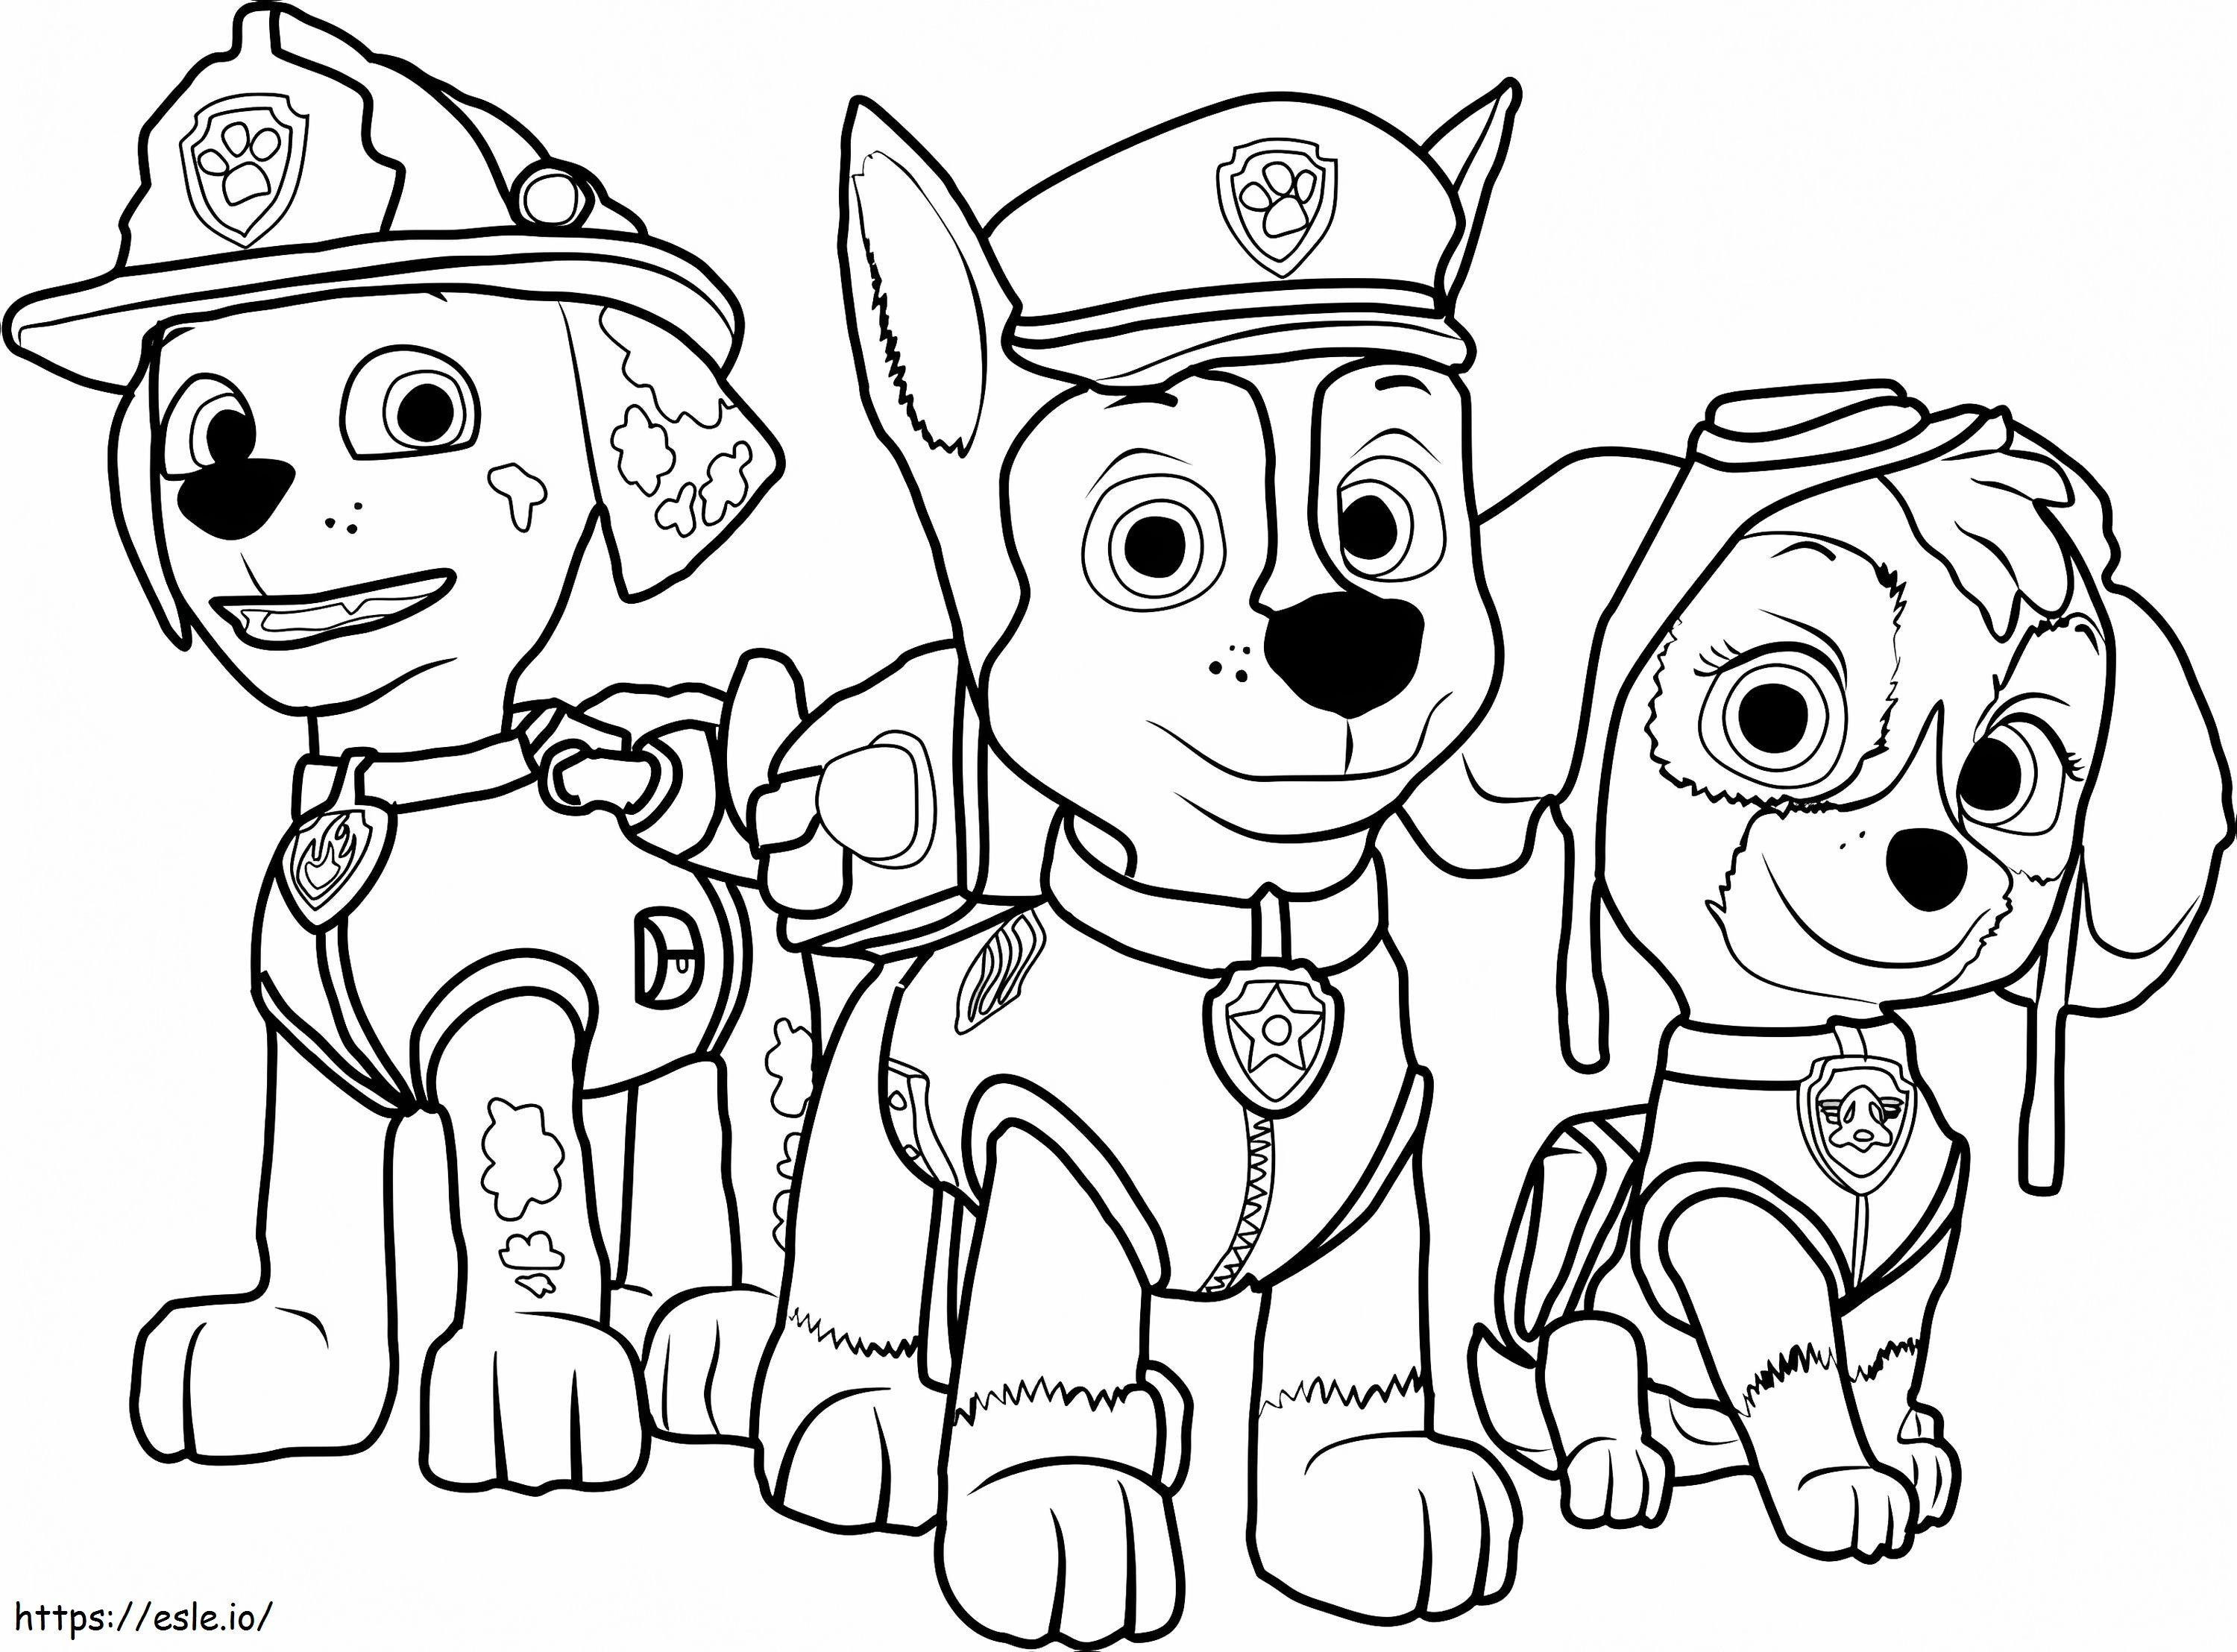 1529603722_32 coloring page